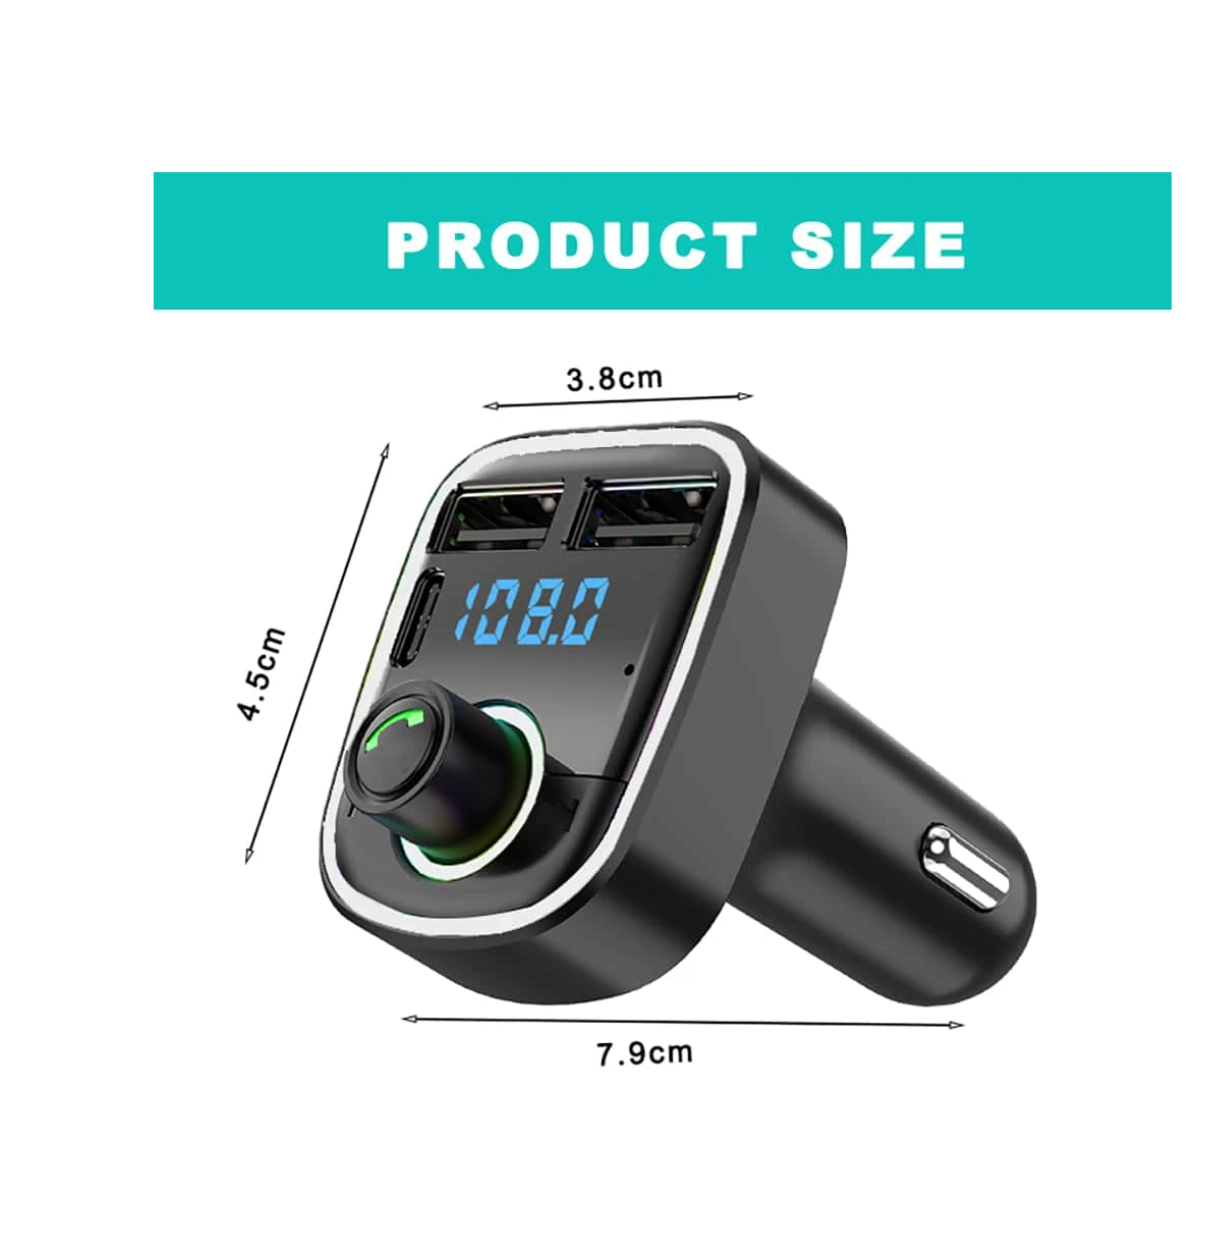 Drive in Harmony: Car Bluetooth 5.0 Wireless Handsfree FM Transmitter with 2 USB+PD Charger – Your Ultimate Car Kit for Seamless Journeys!